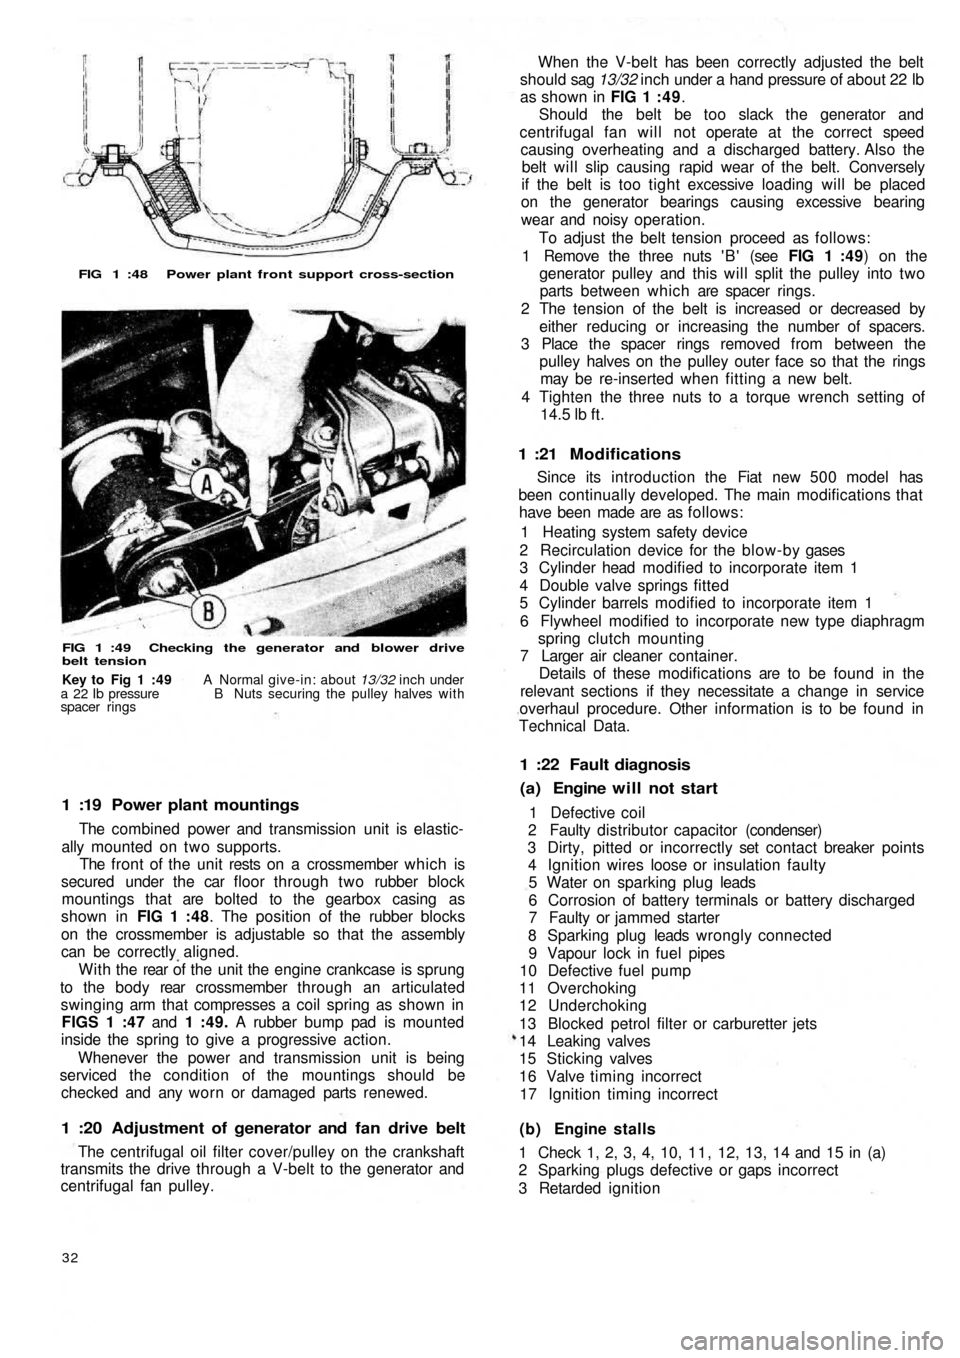 FIAT 500 1967 1.G Workshop Manual FIG 1 :48  Power plant front support cross-section
FIG 1 :49  Checking  the generator and  blower drive
belt tension
1 :19  Power plant mountings
The combined power and transmission unit is elastic-
a